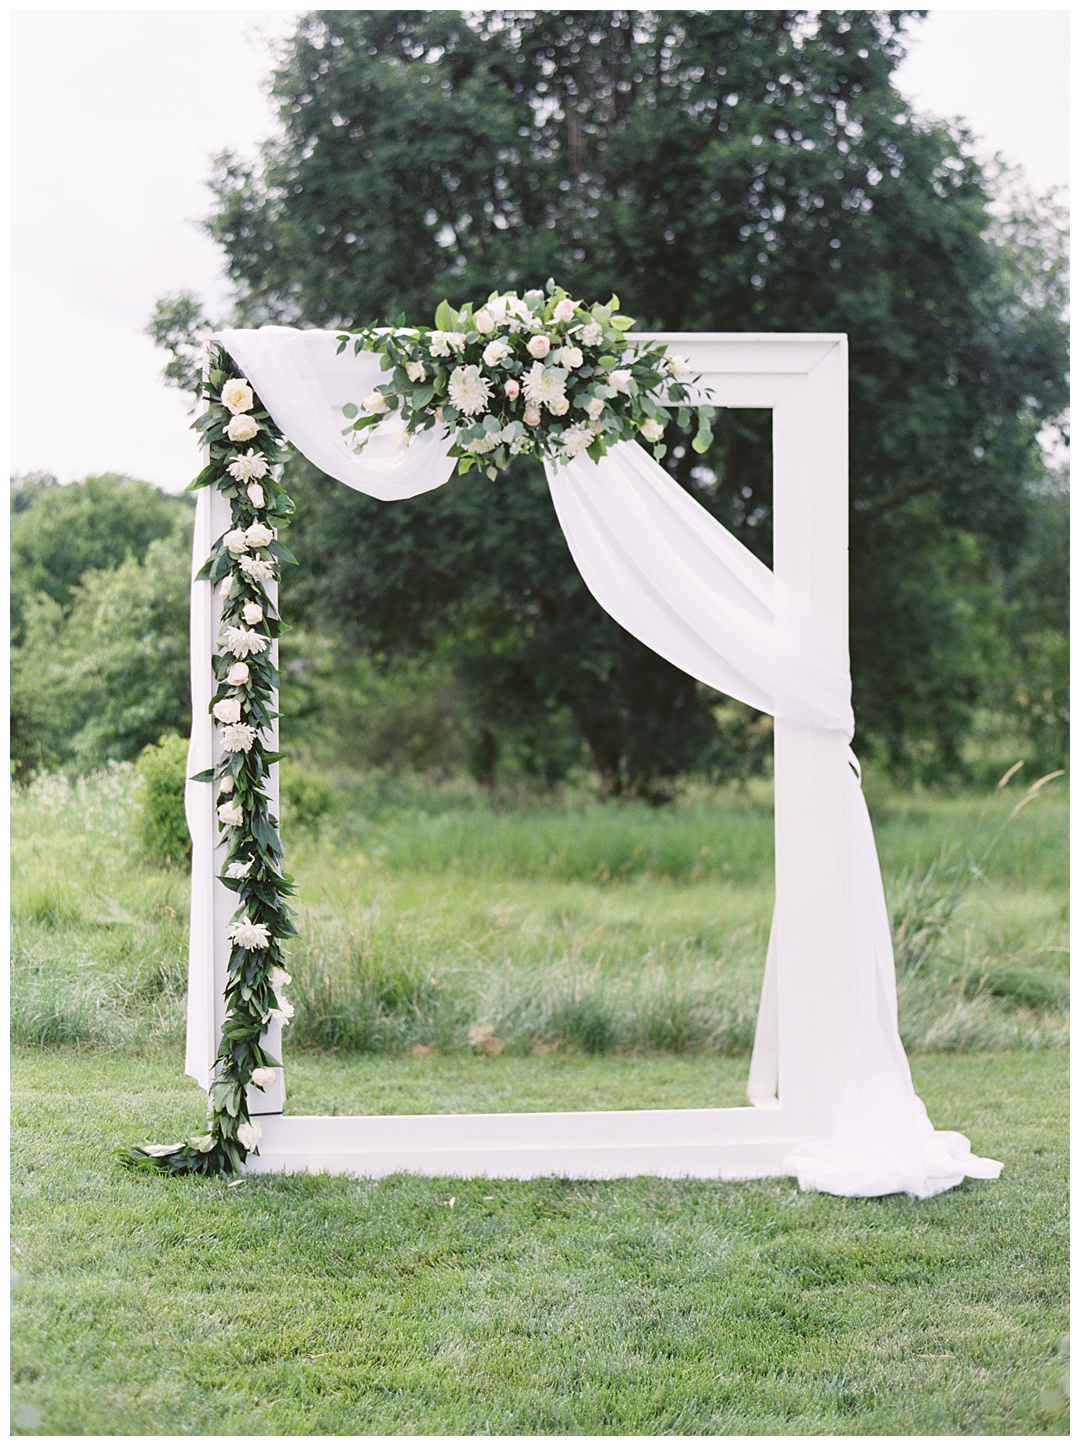 Ceremony Decor Altar Lush Backyard Wedding on Film Featured on Magnolia Rouge with Sarah Sunstrom Photography